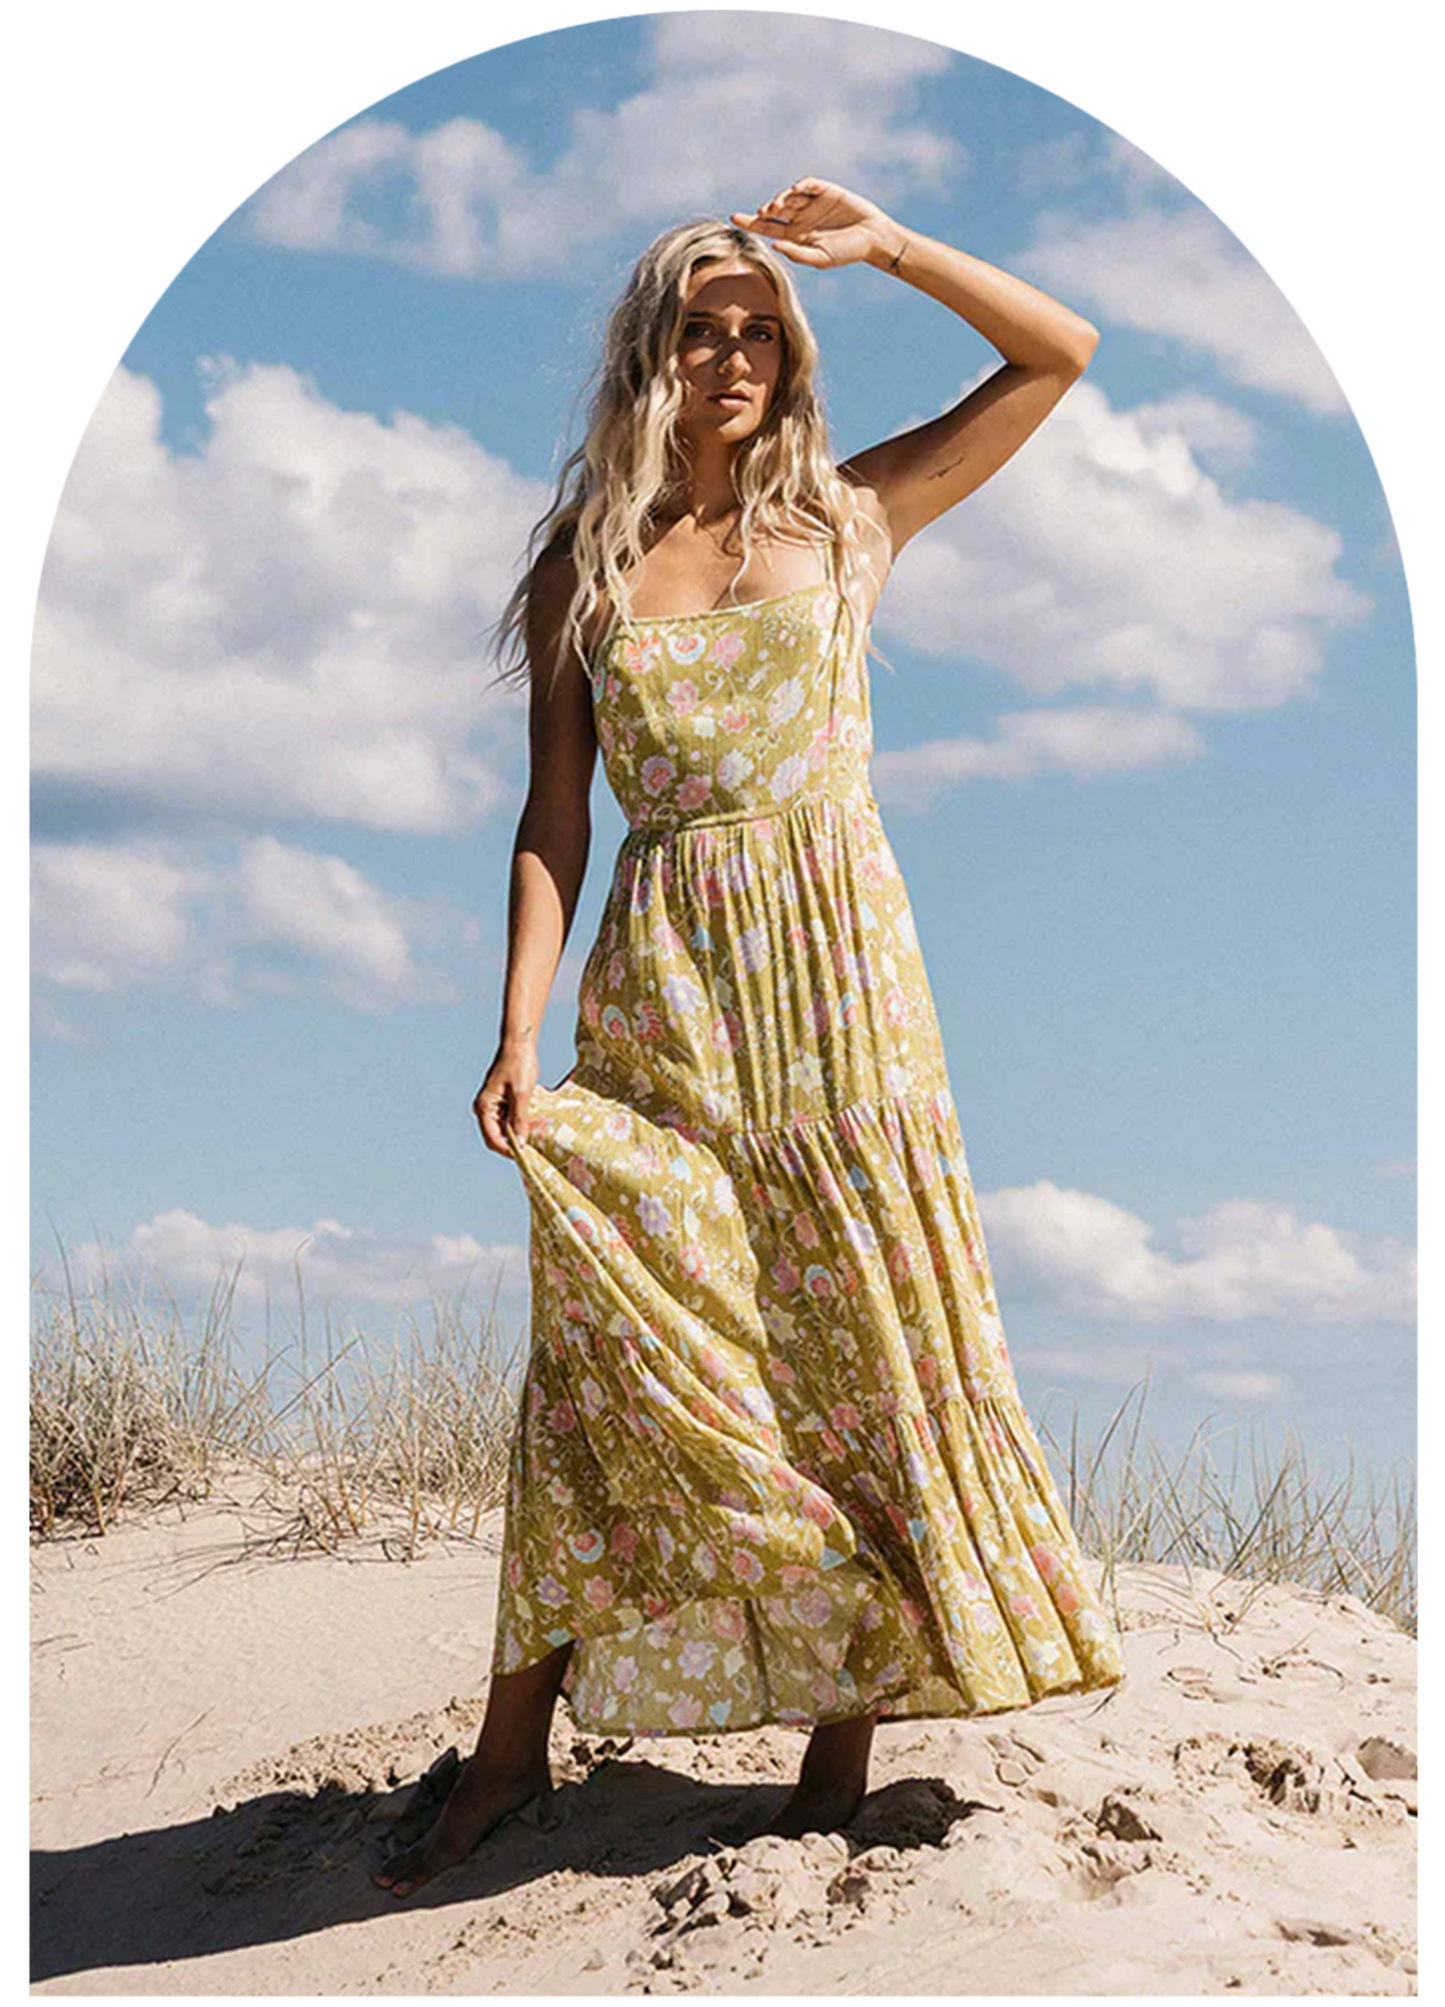 Woman at the beach holding standing in a sundress from the brand MINKPINK